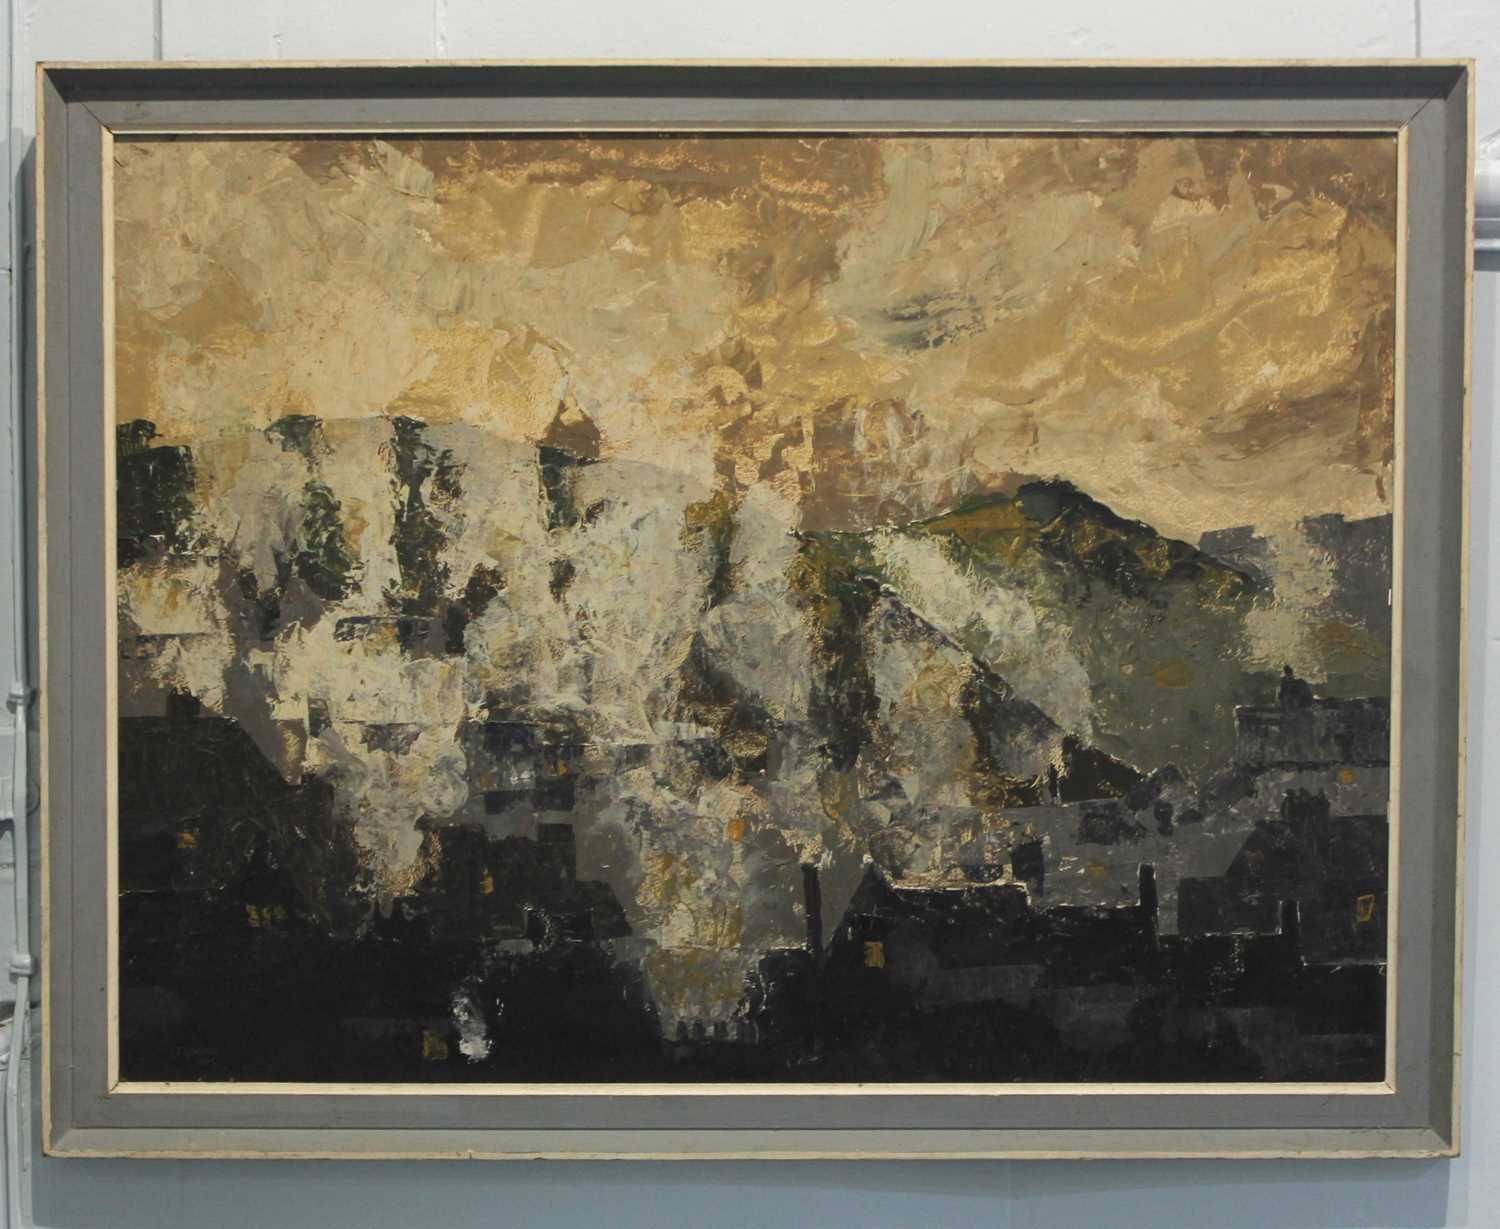 T G Wood (20th century), mountainous landscape with buildings in the foreground, oil on board,